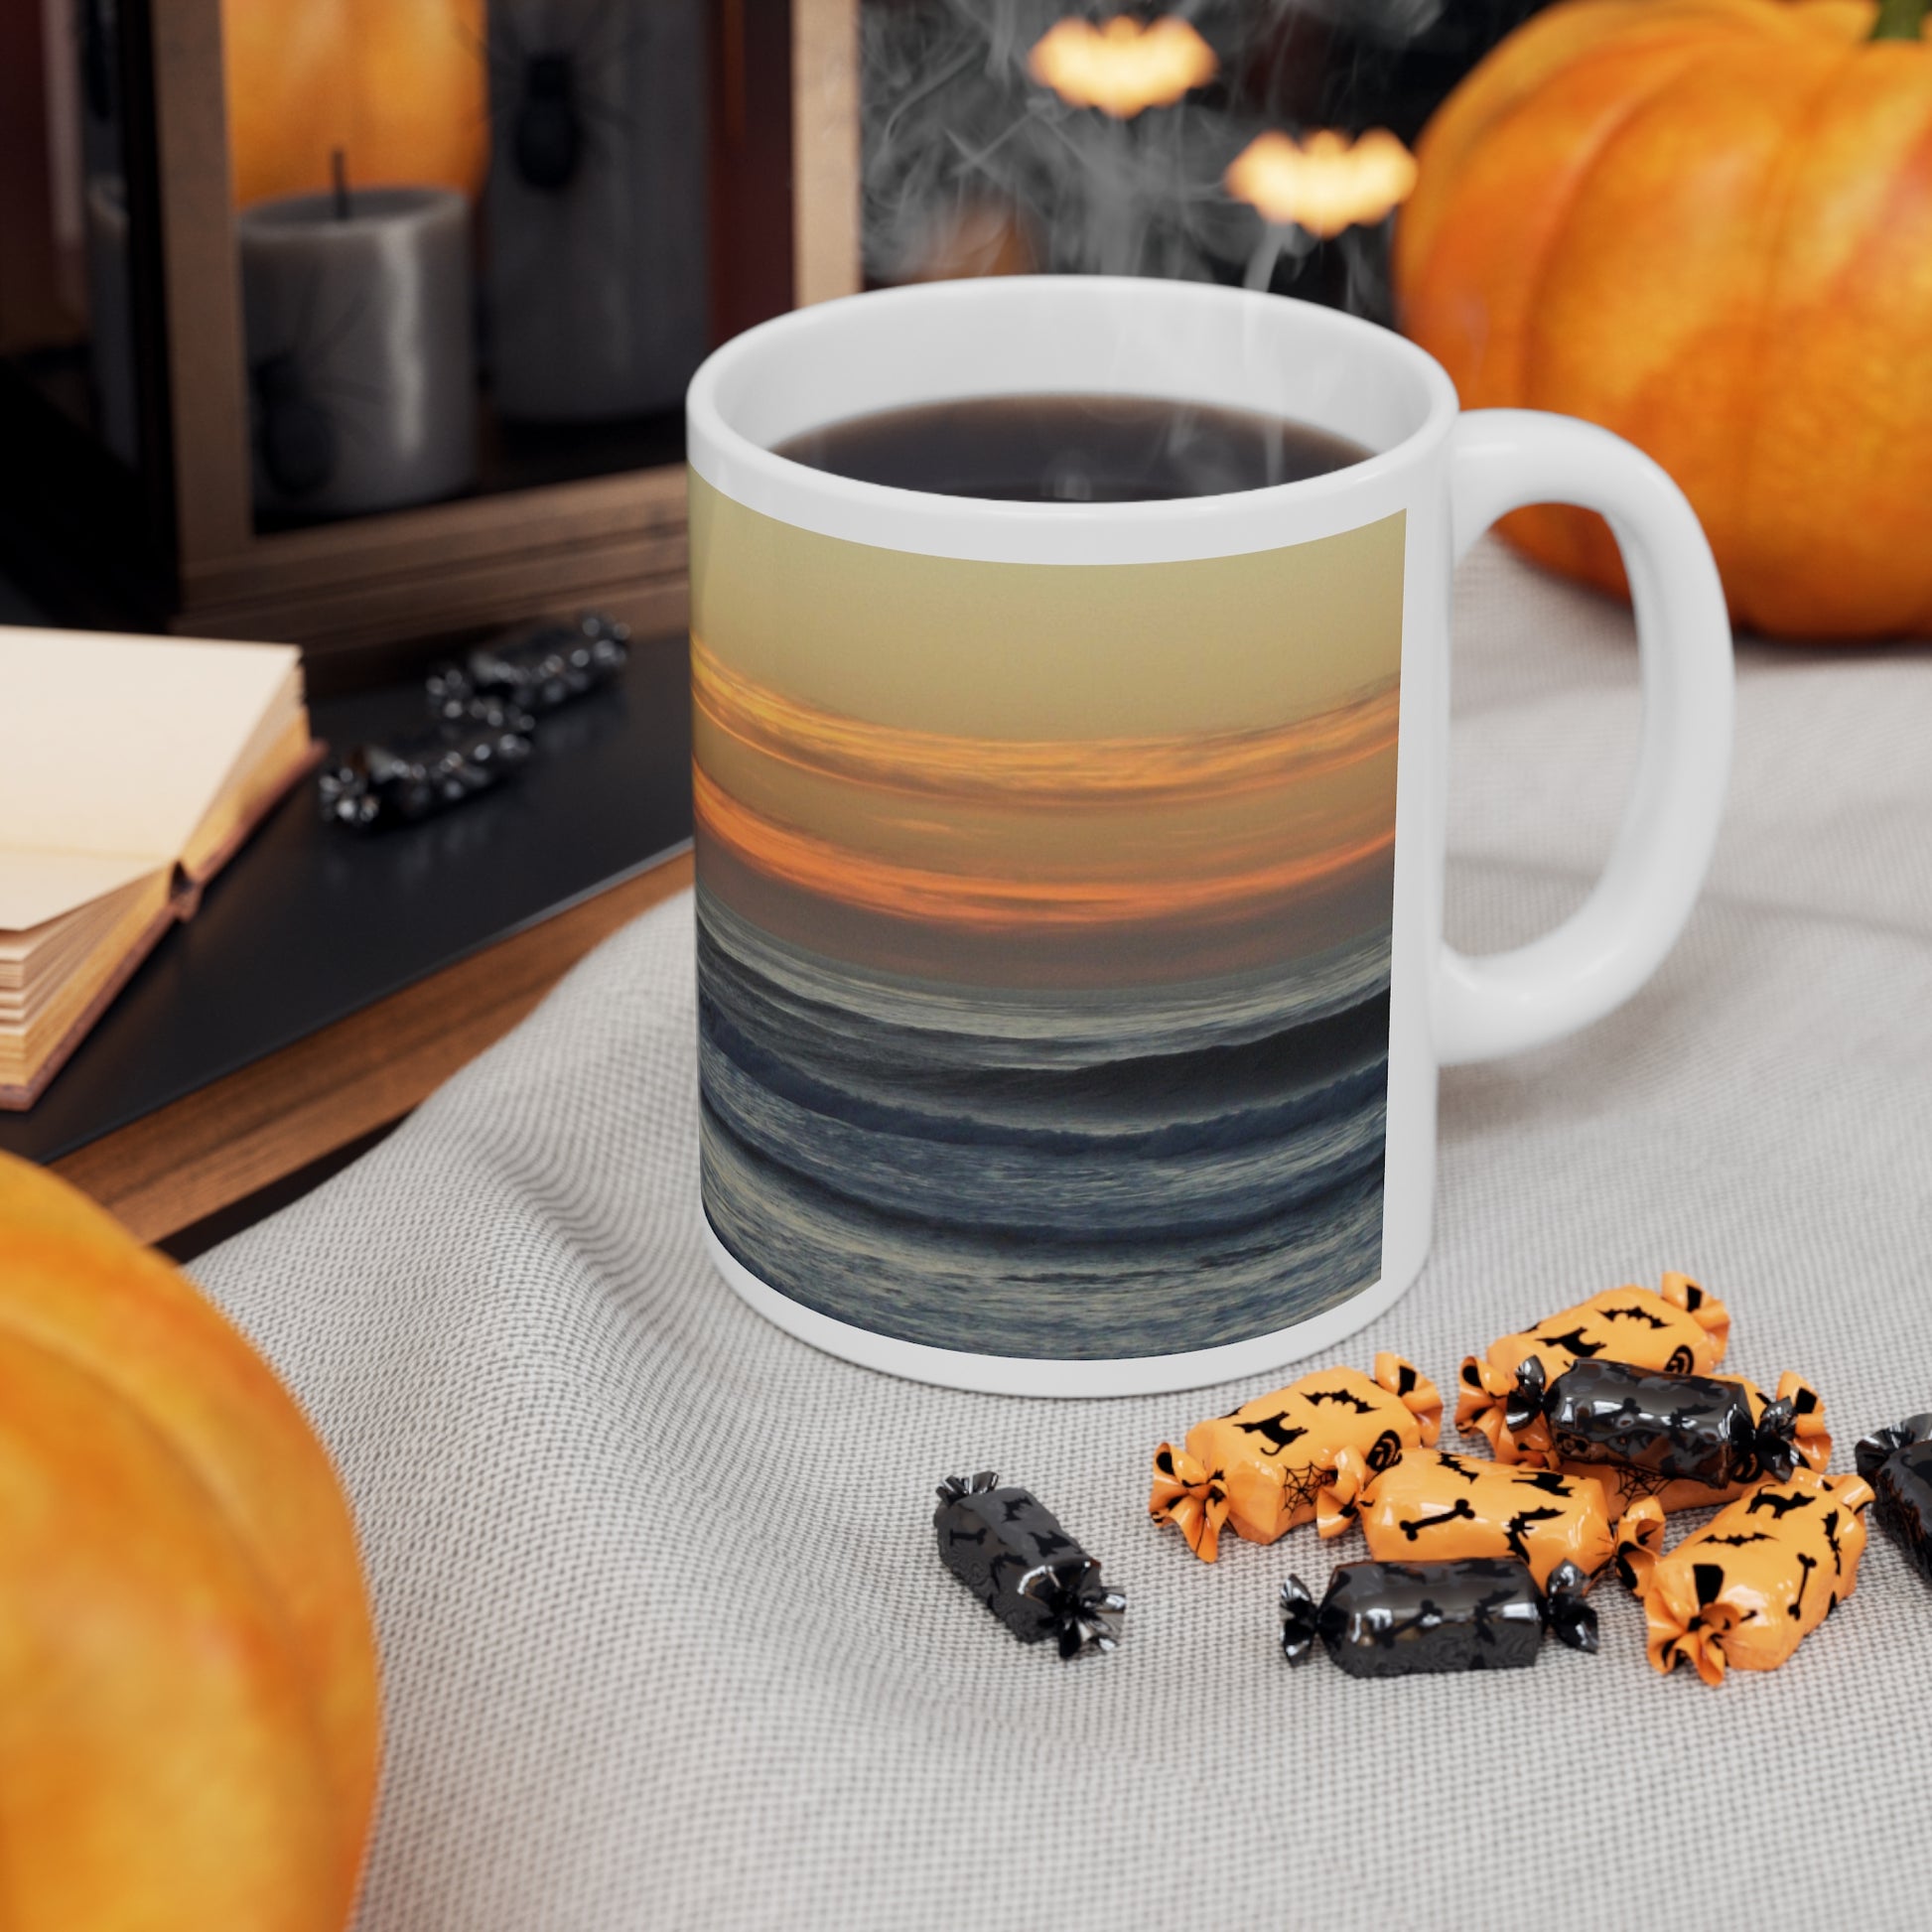 Mock up of the mug with Halloween decorations and candy